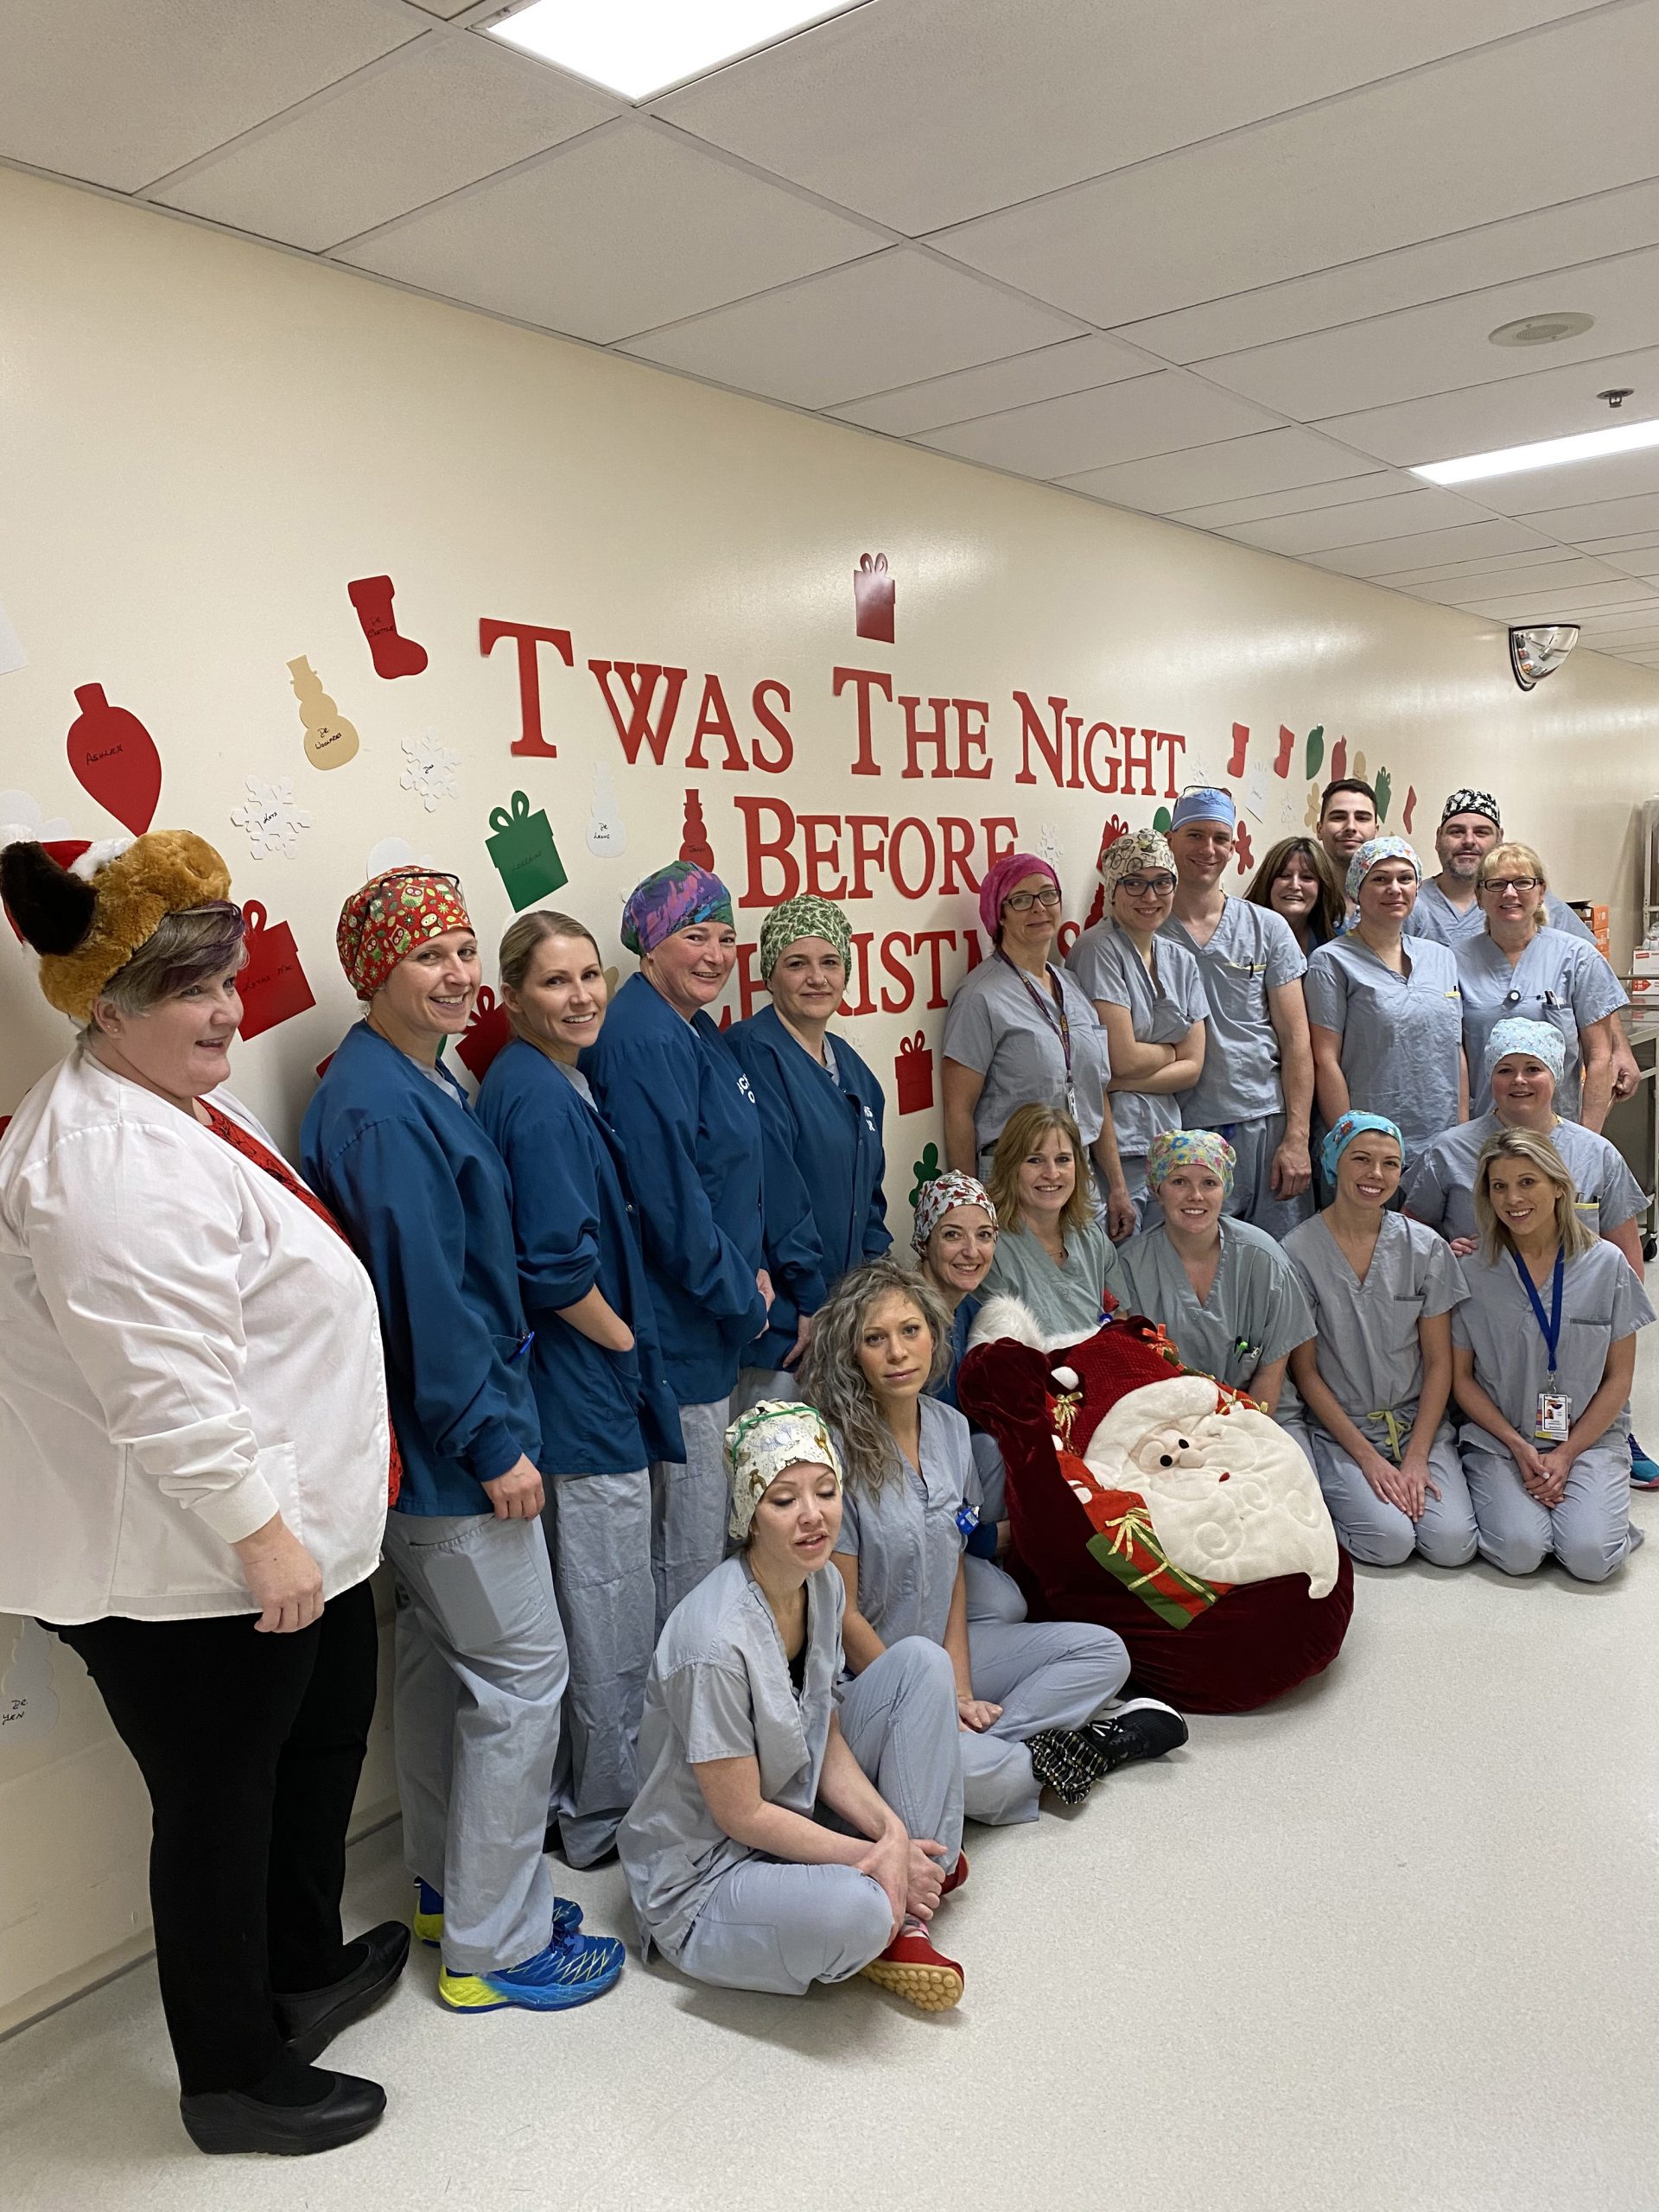 Holidays at BGH - giving inside and out